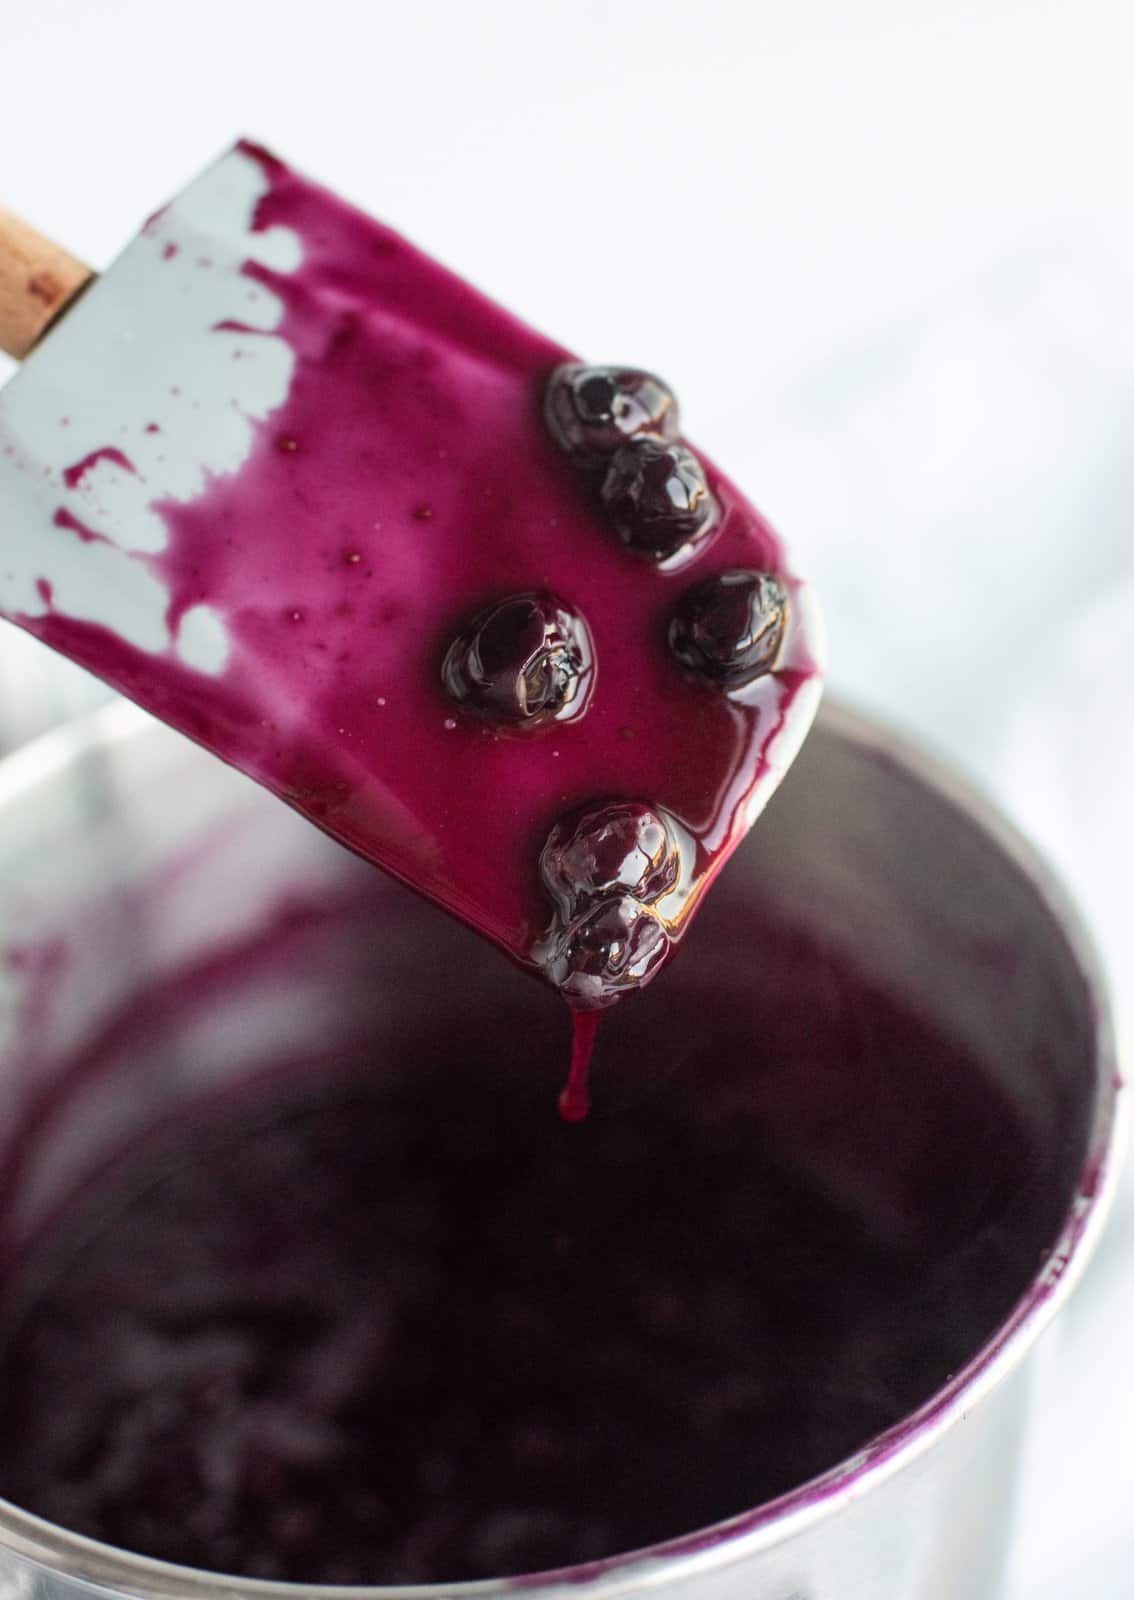 Blueberry sauce made up in pan.